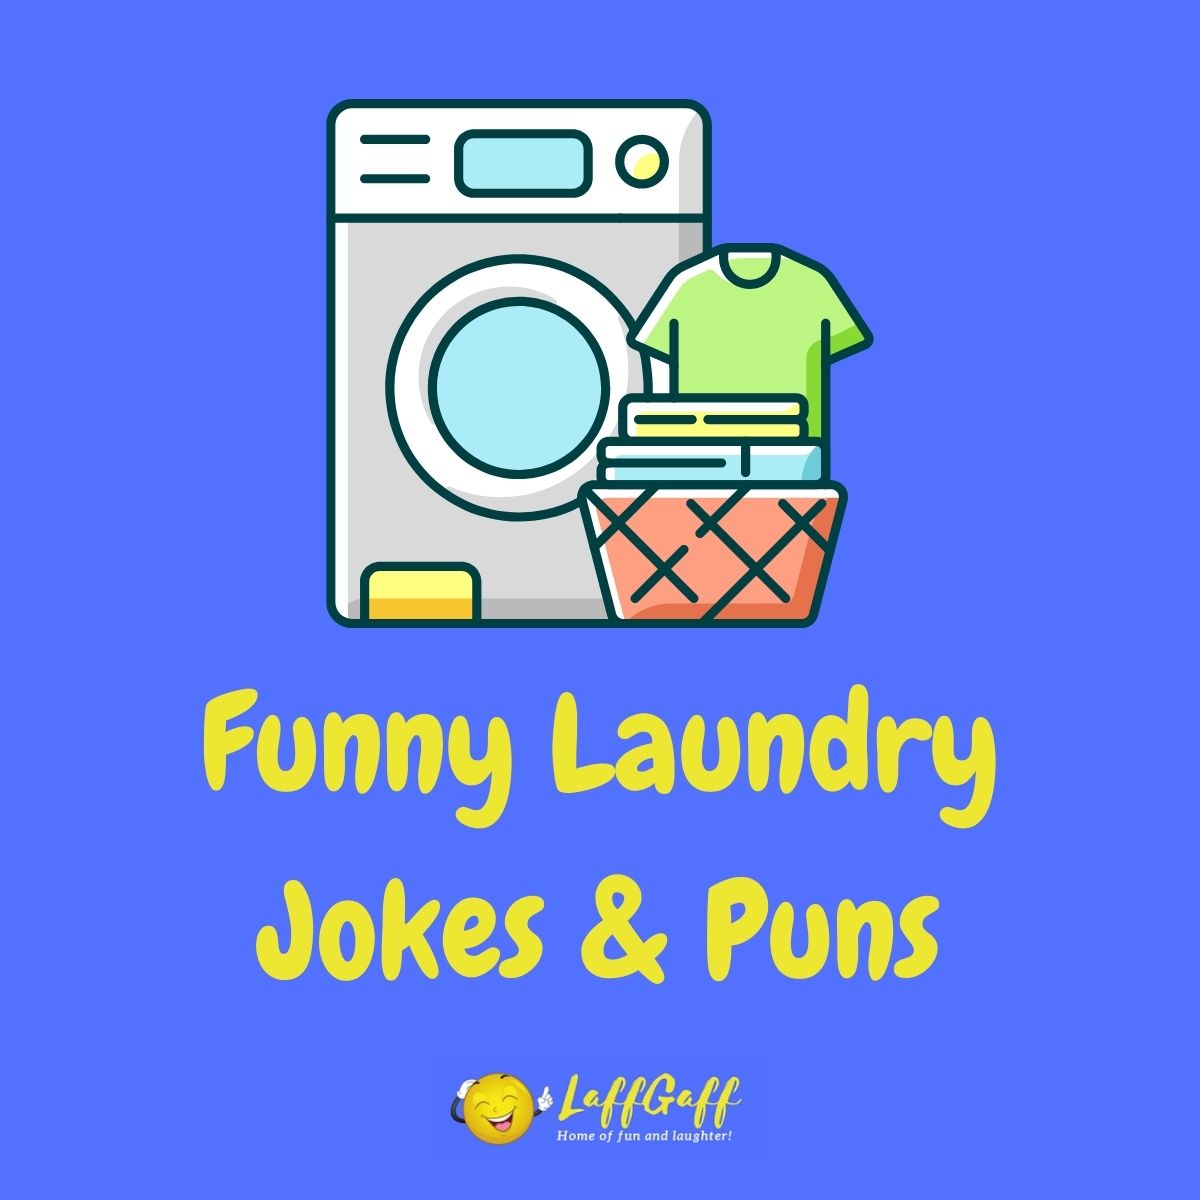 Featured image for a page of funny laundry jokes and puns.